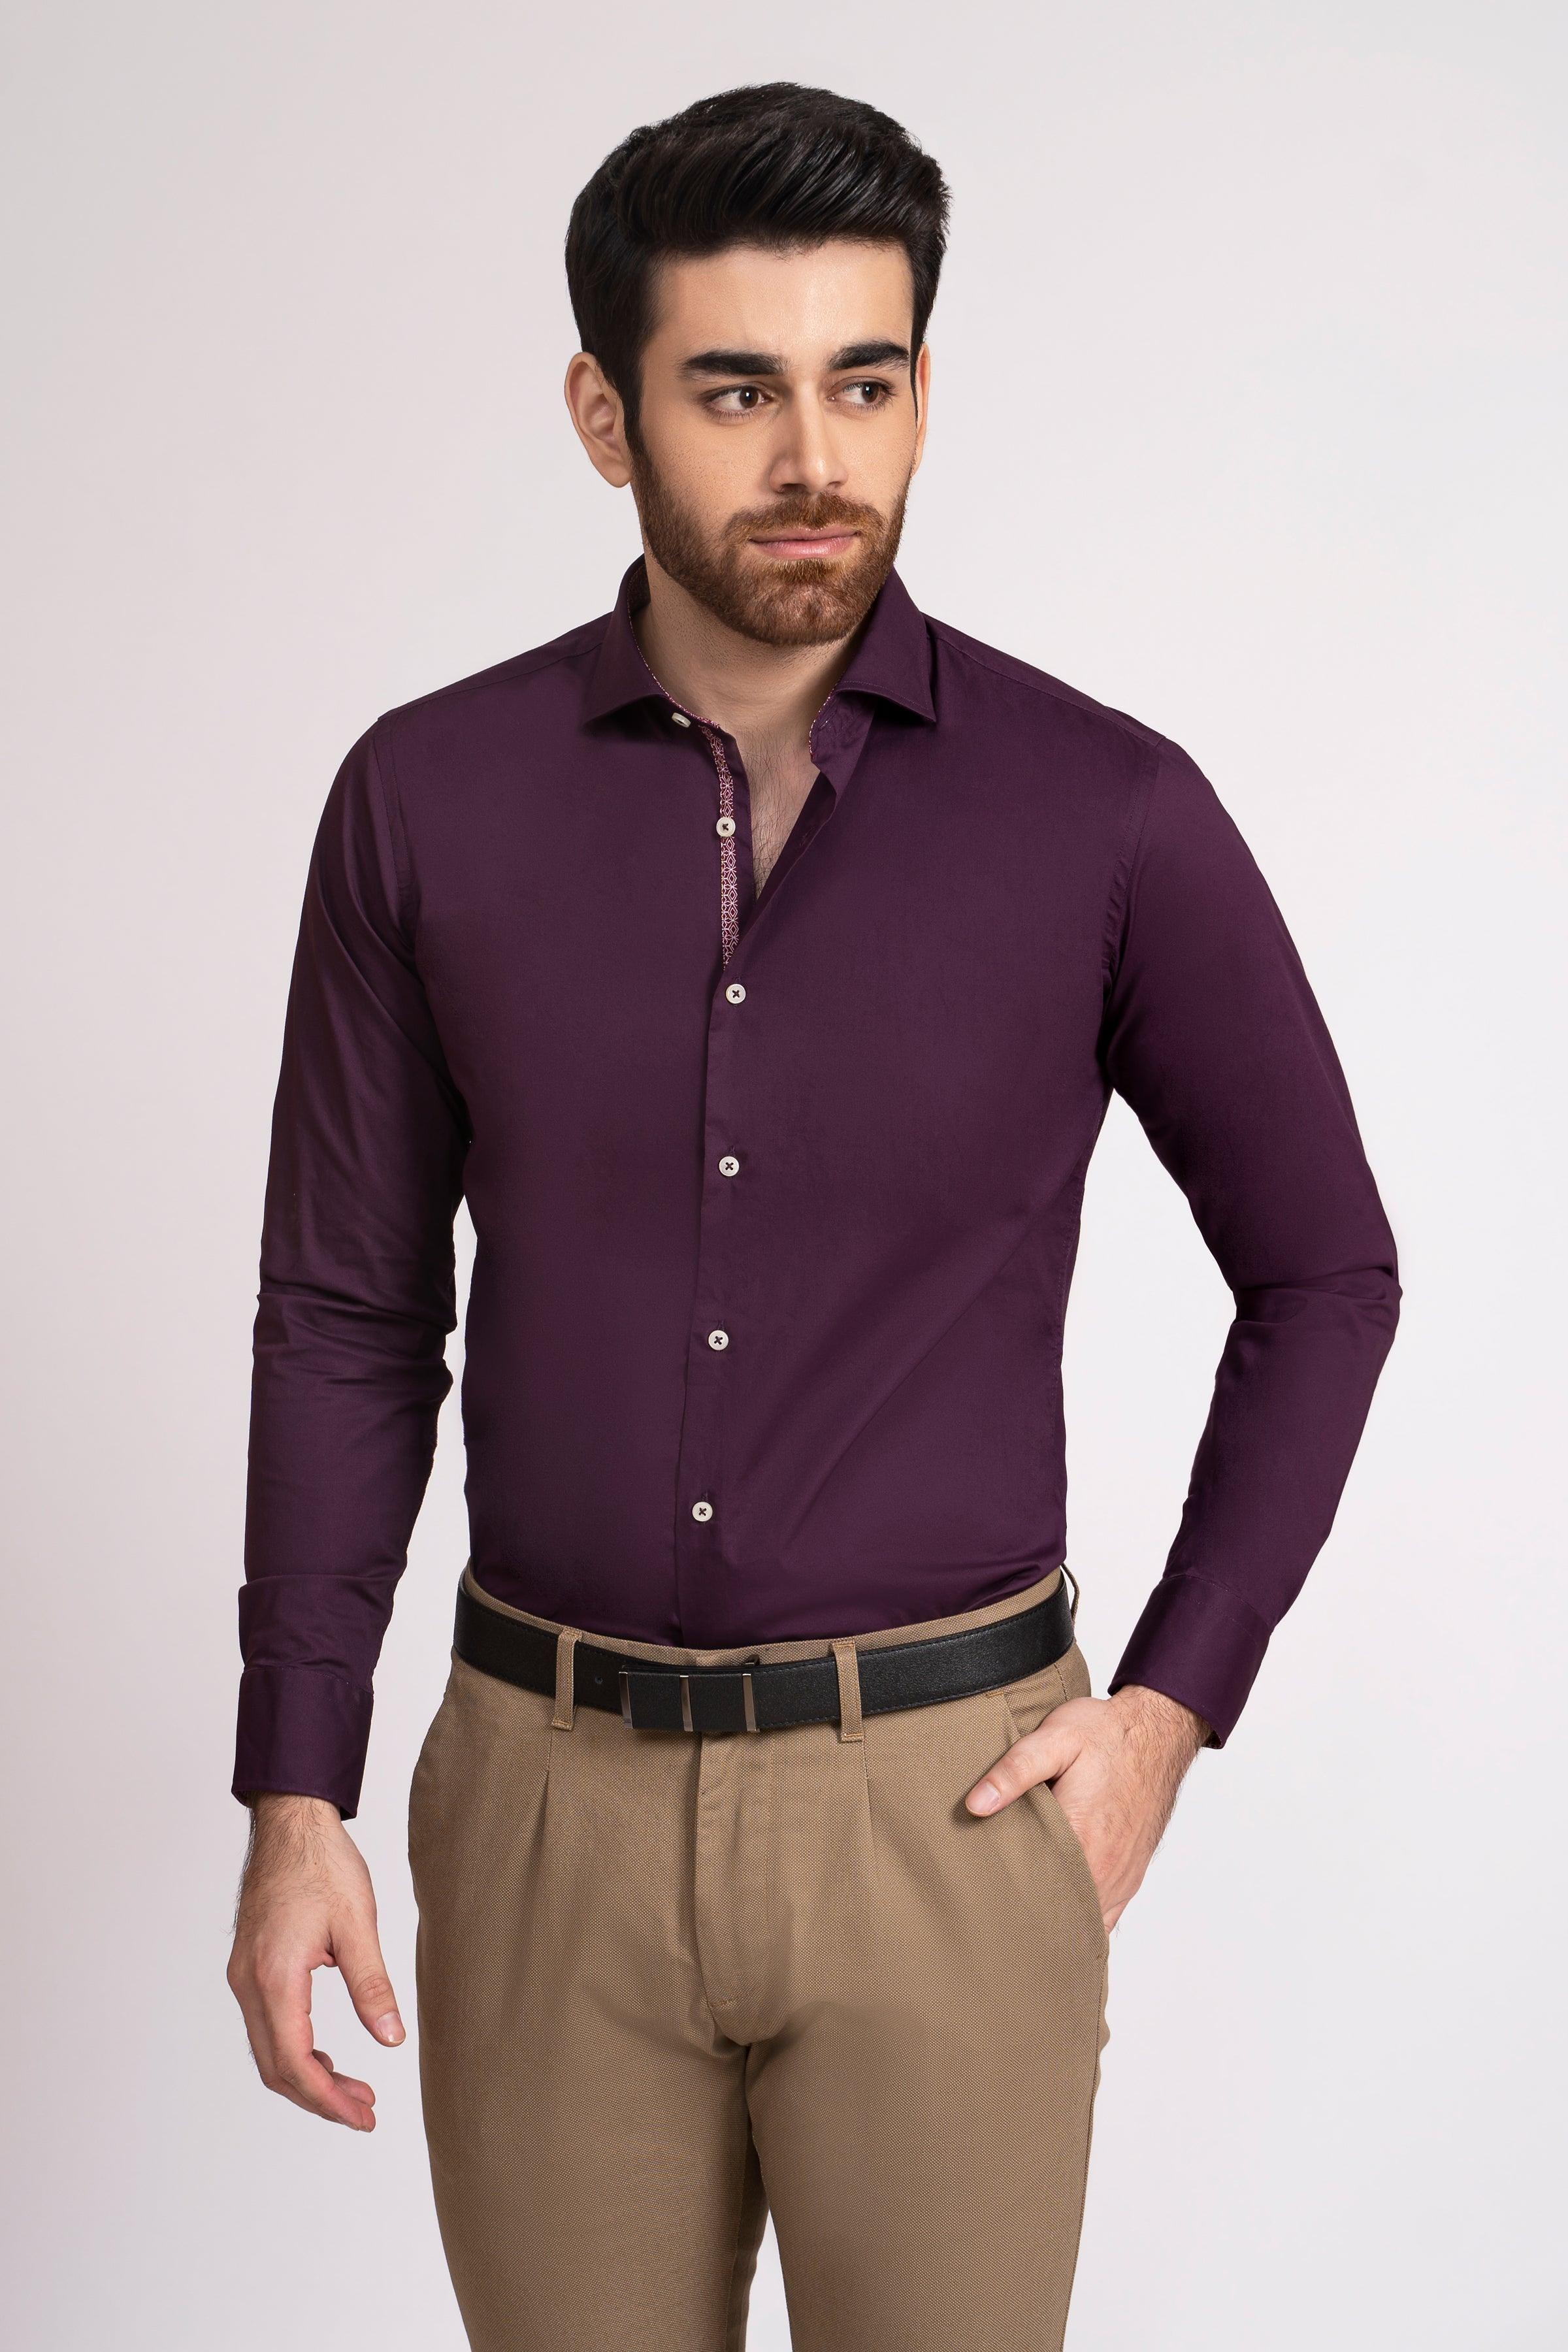 SEMI FORMAL SHIRT FRENCH COLLAR BEET RED at Charcoal Clothing